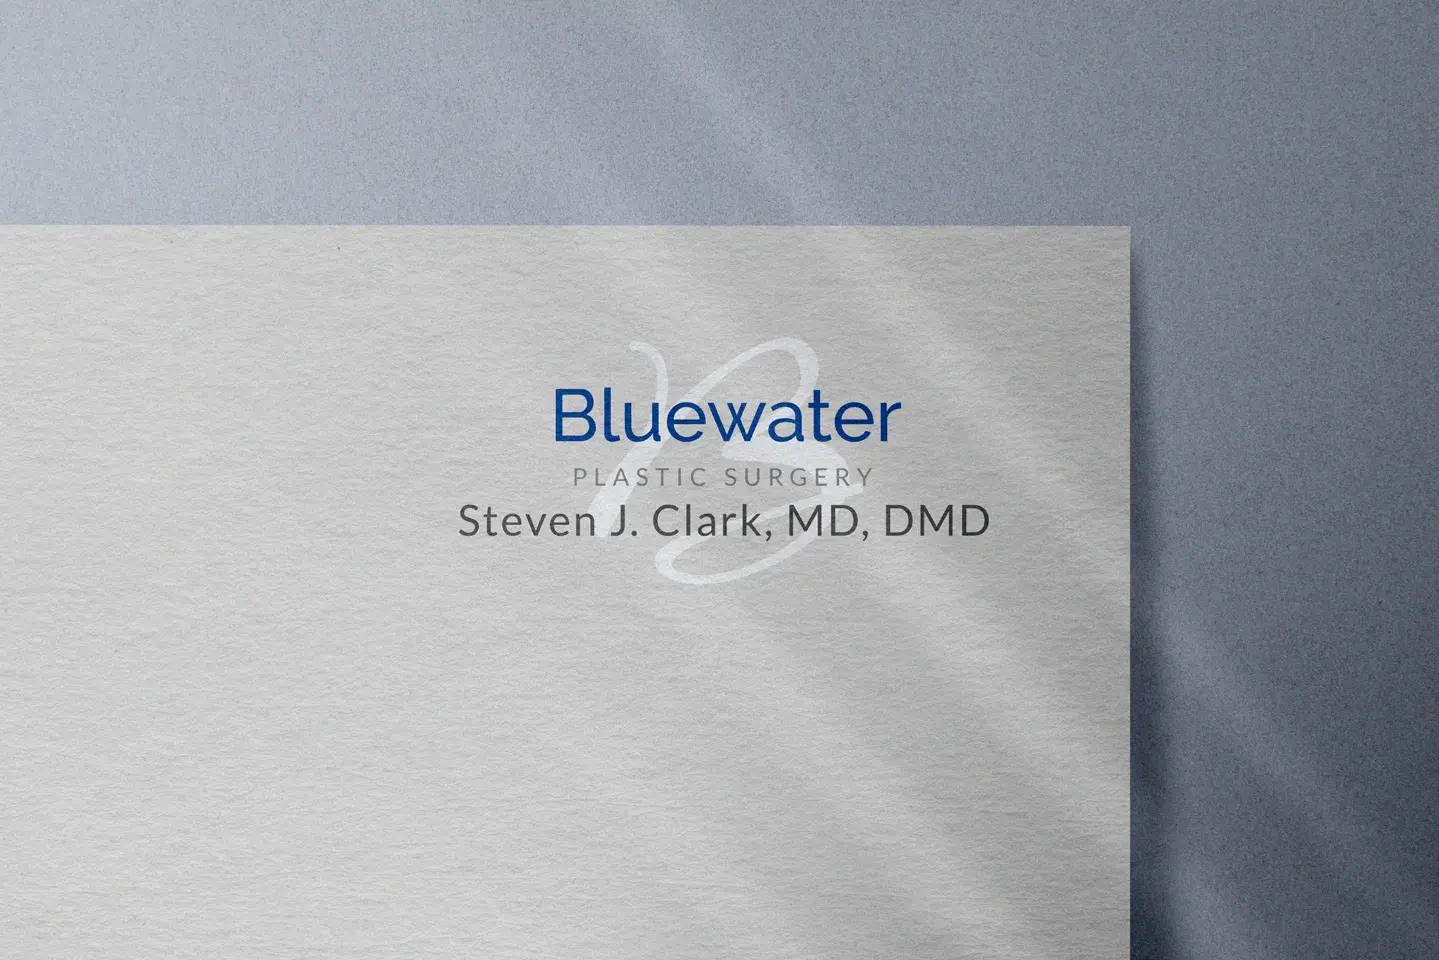 Bluewater Plastic Surgery Gallery Image